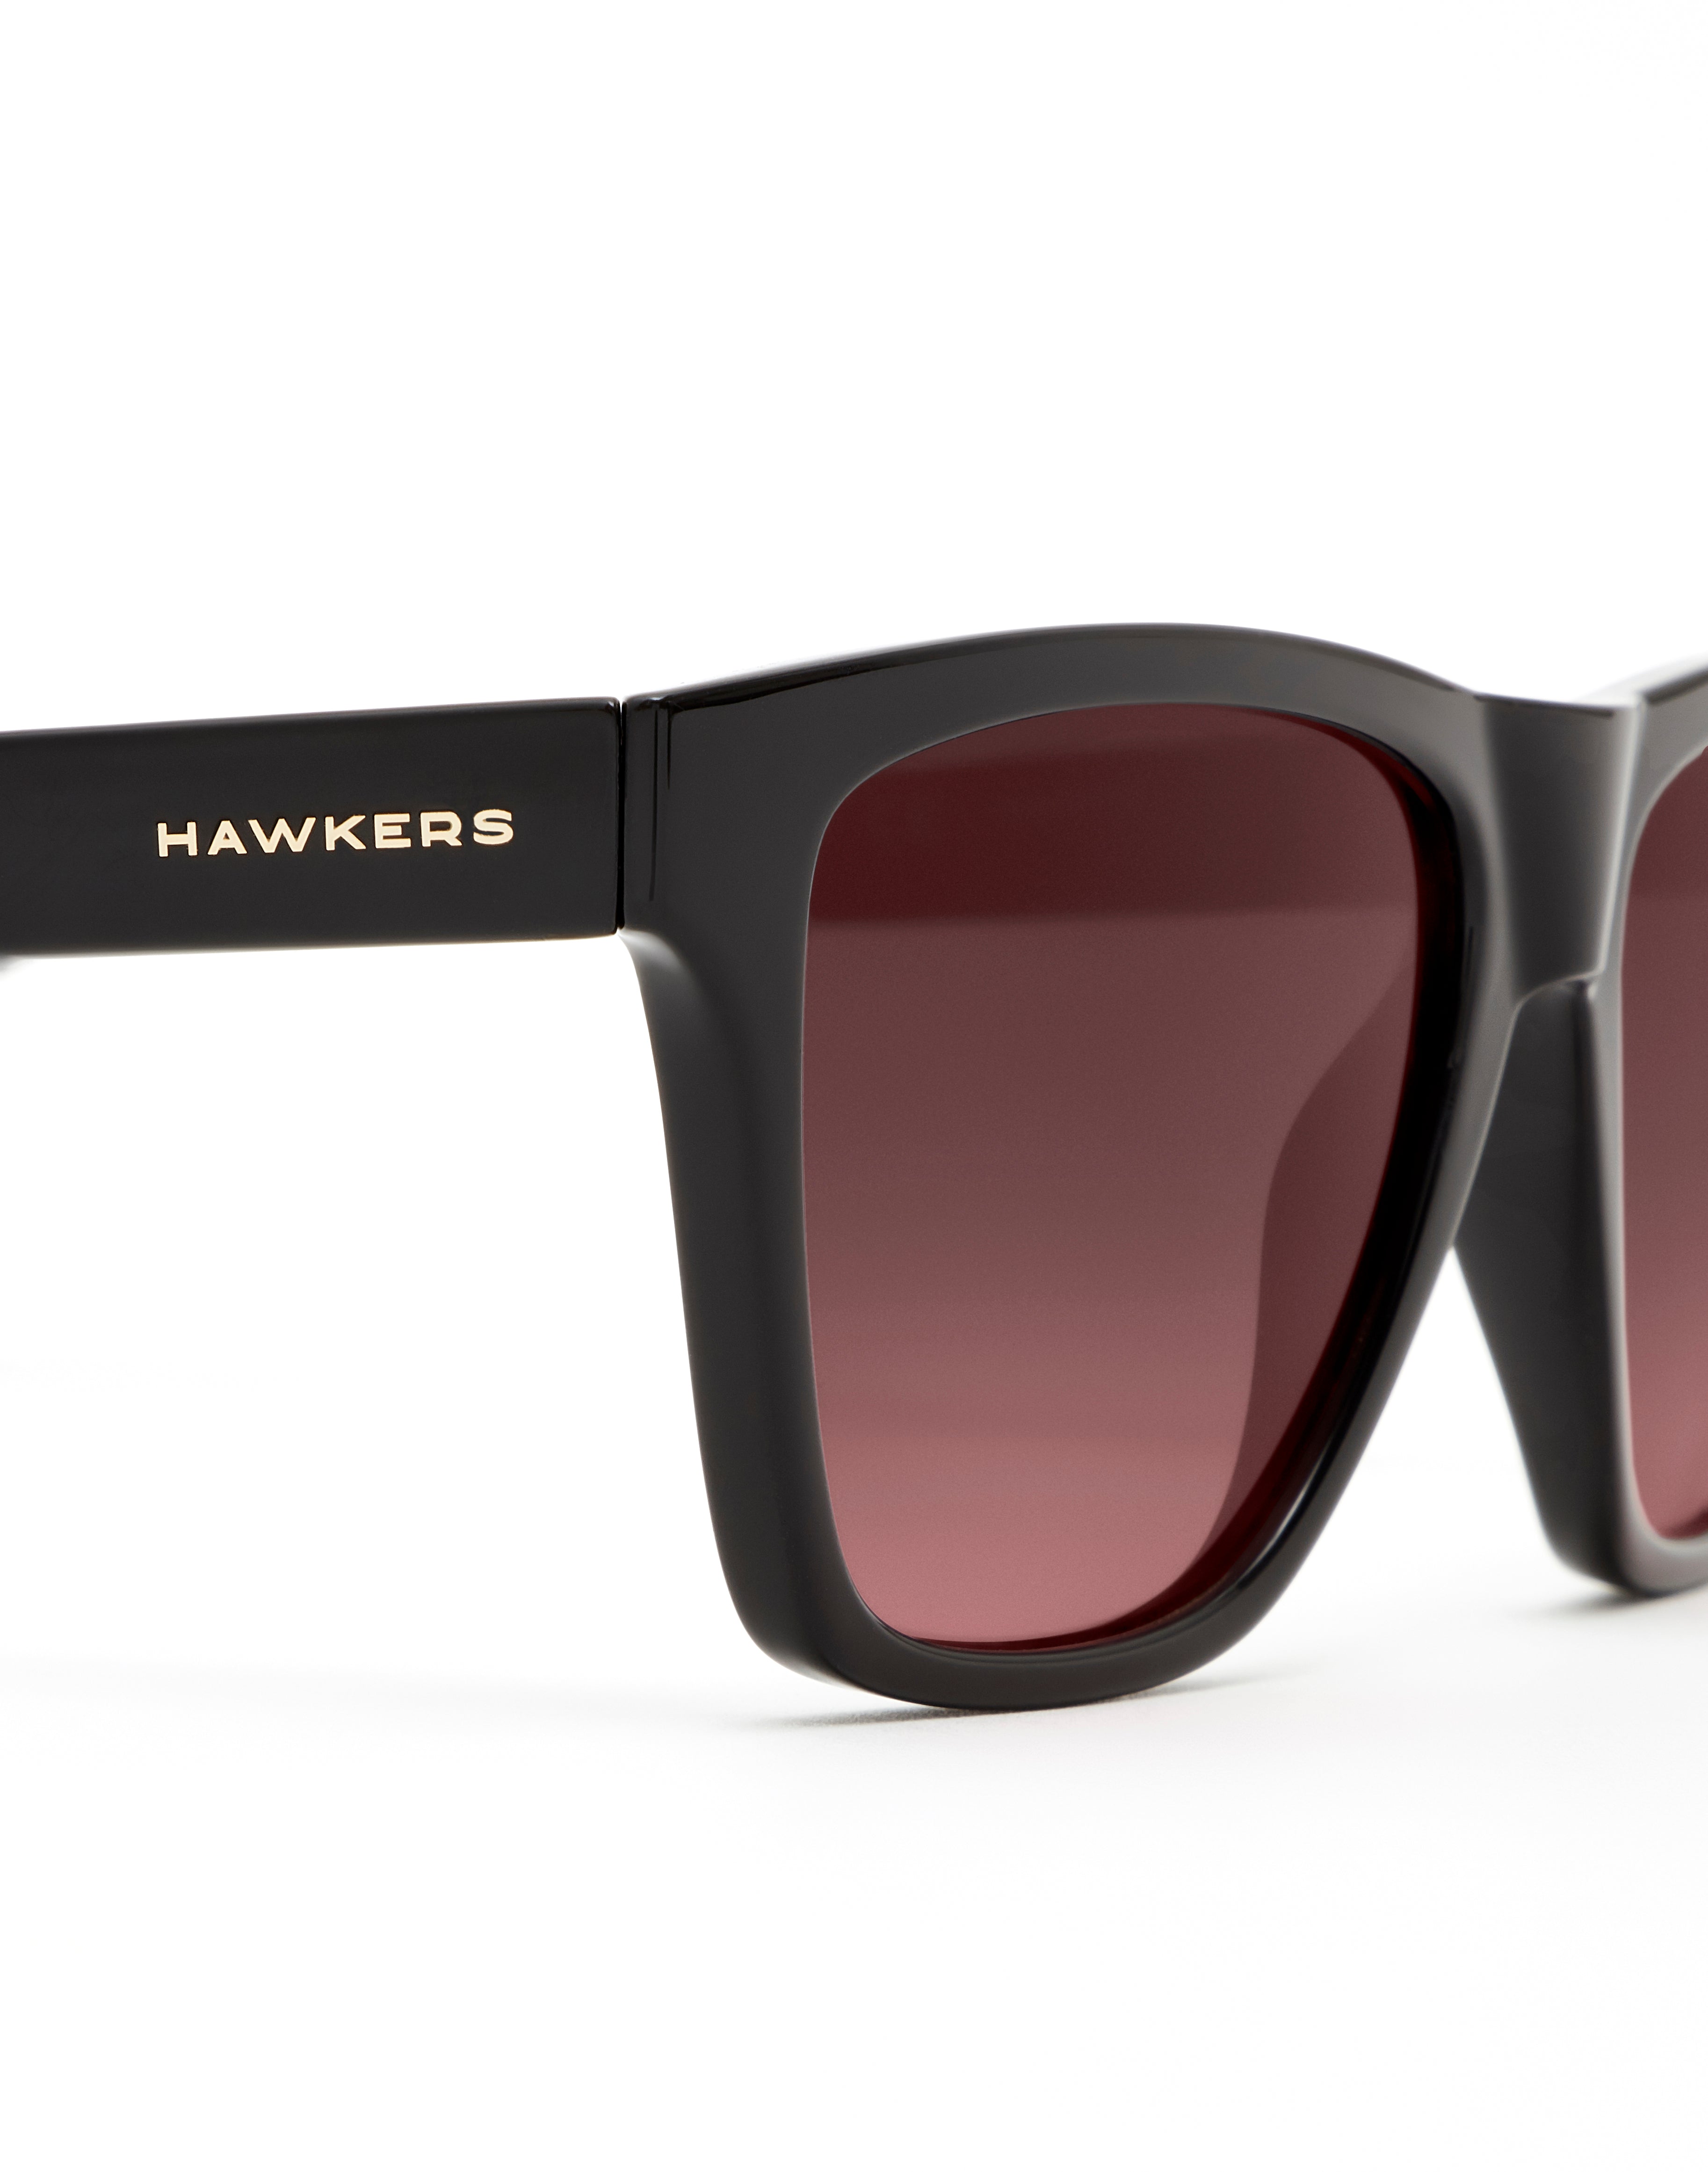 HAWKERS - ONE LS Diamond Black Wine For Men and Women UV400